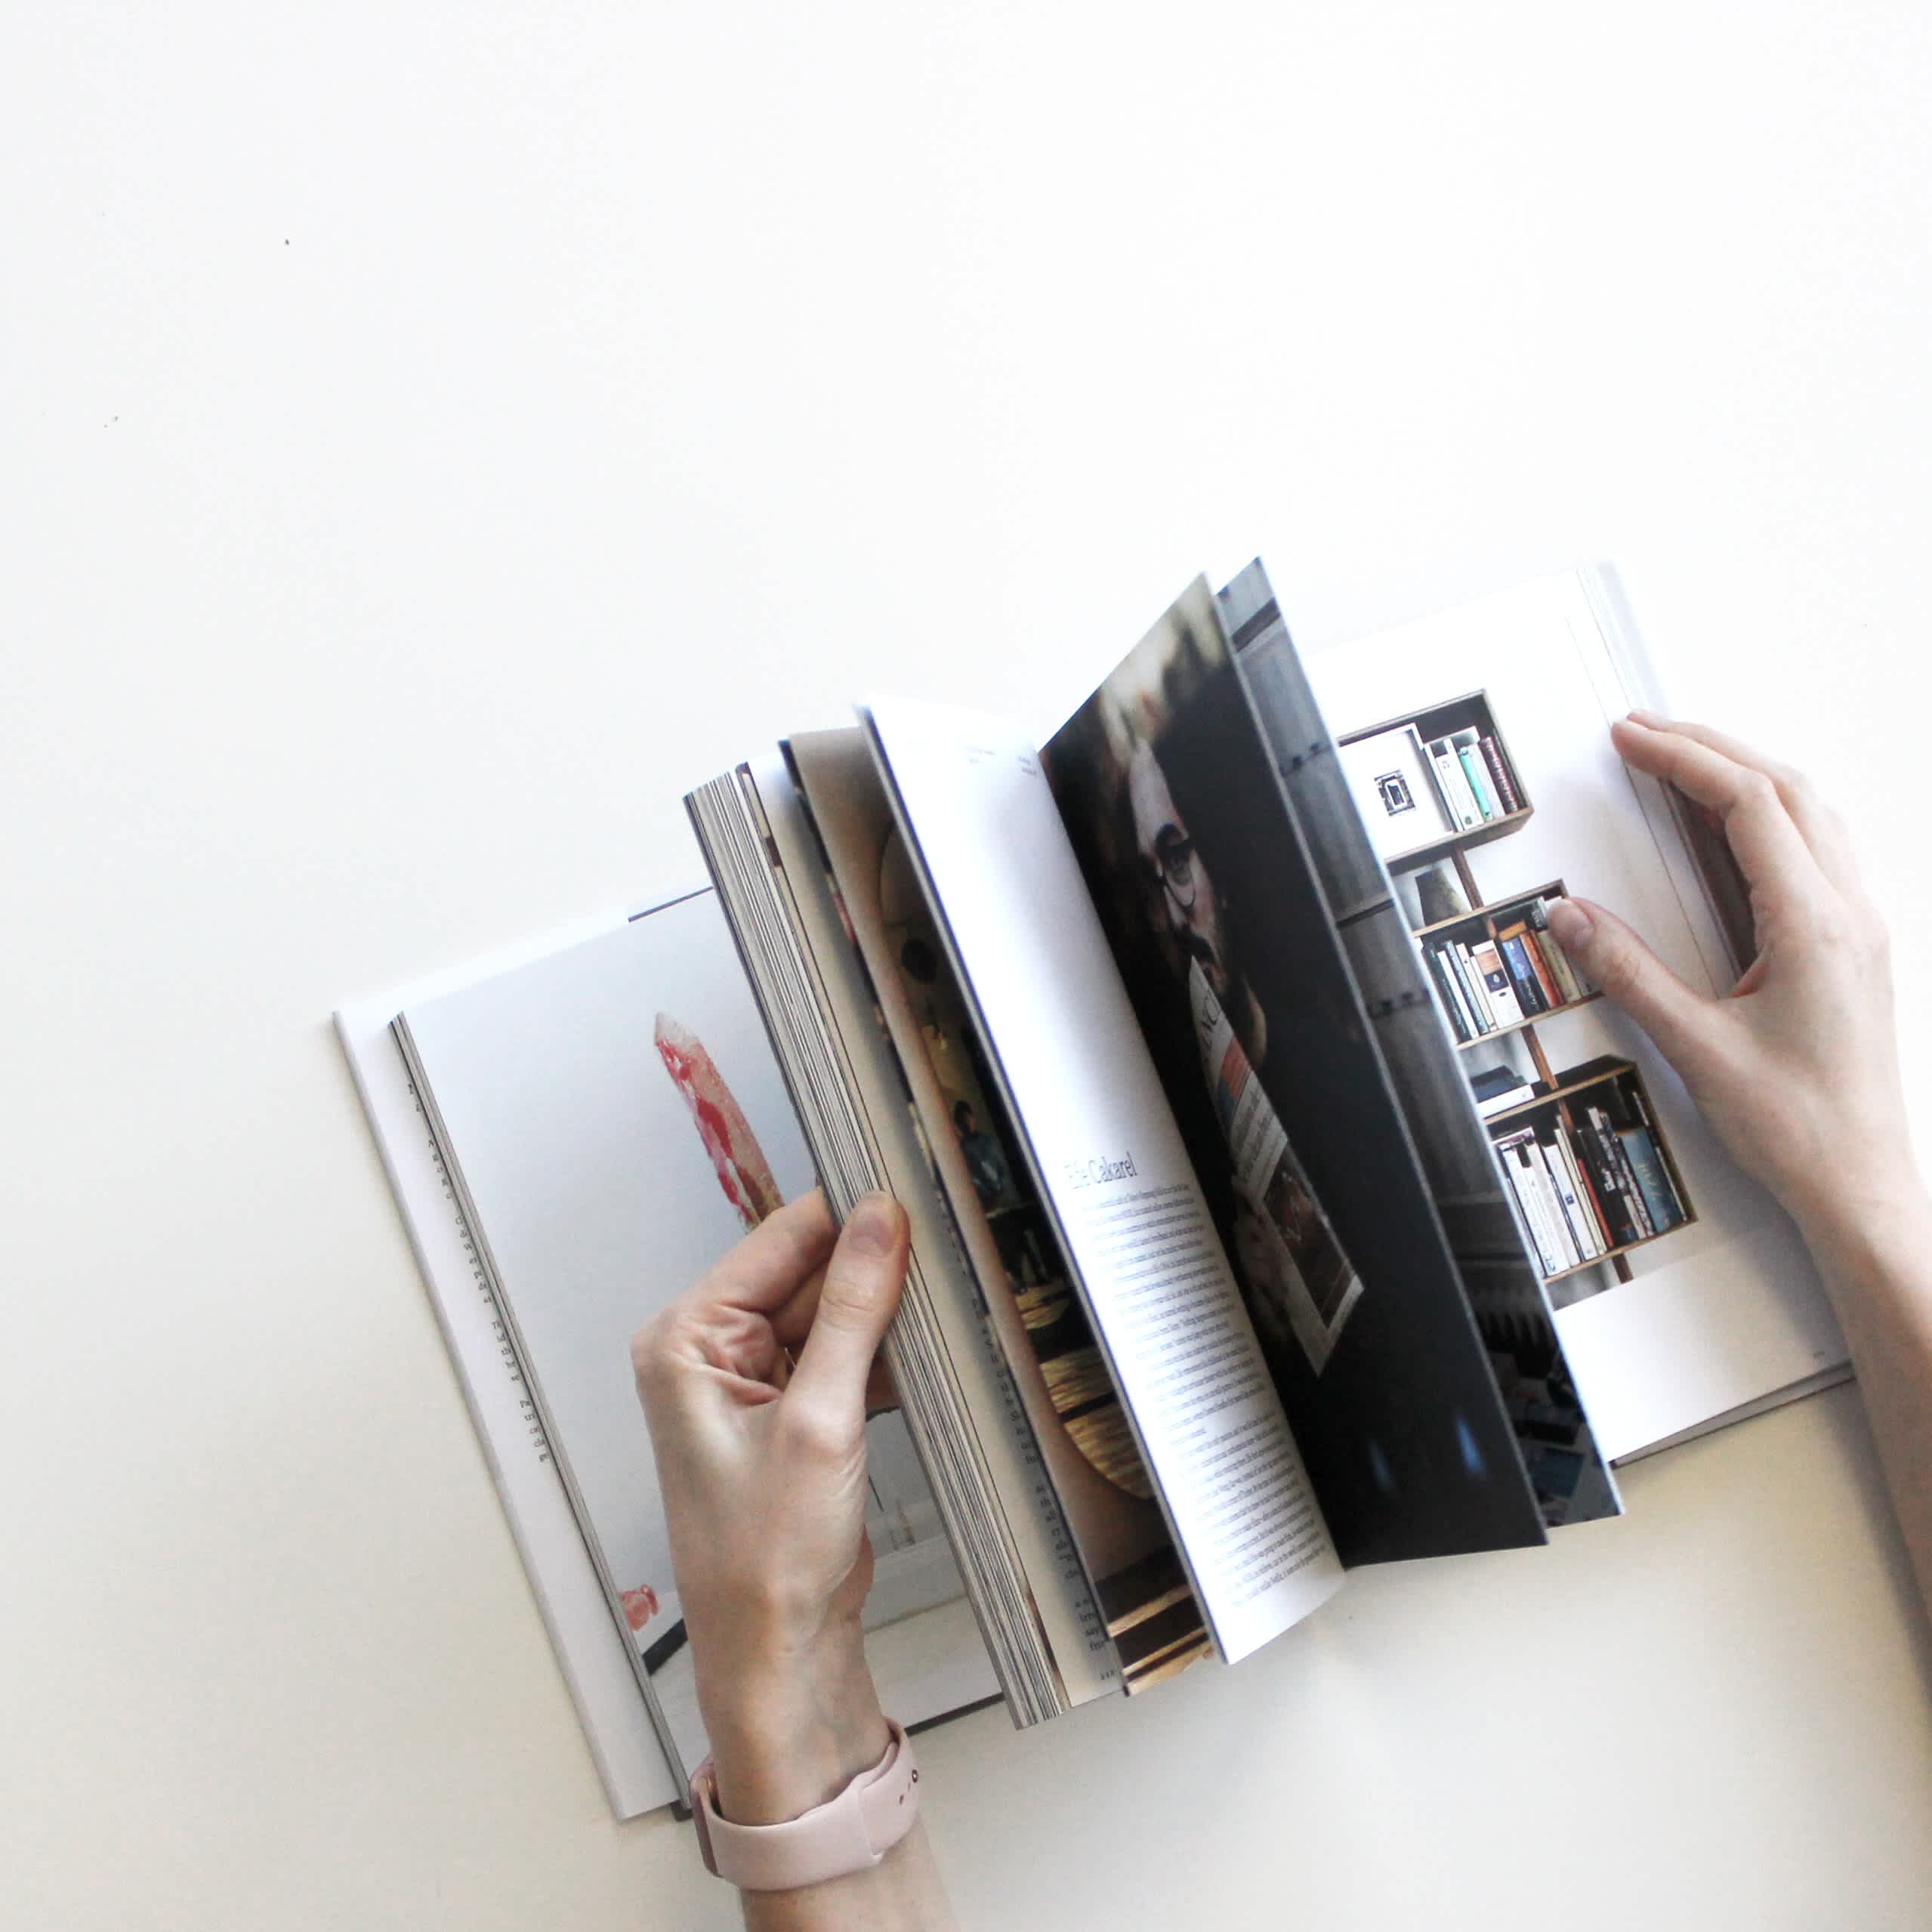 A person flipping through a design book with large photography.